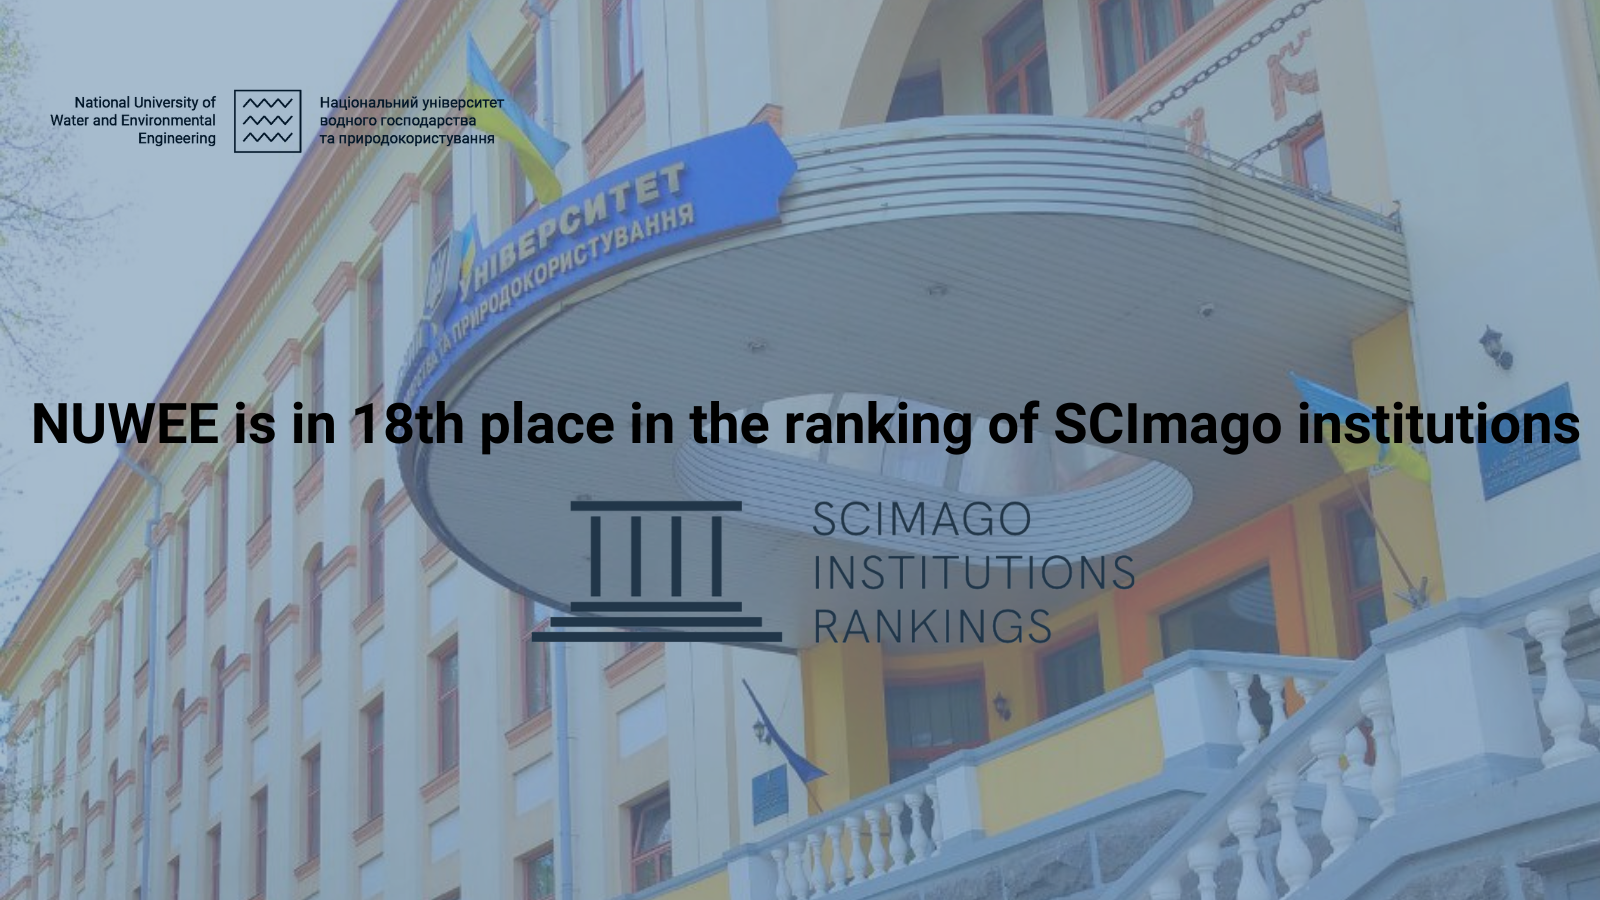 NUWEE is in 18th place in the ranking of SCImago institutions